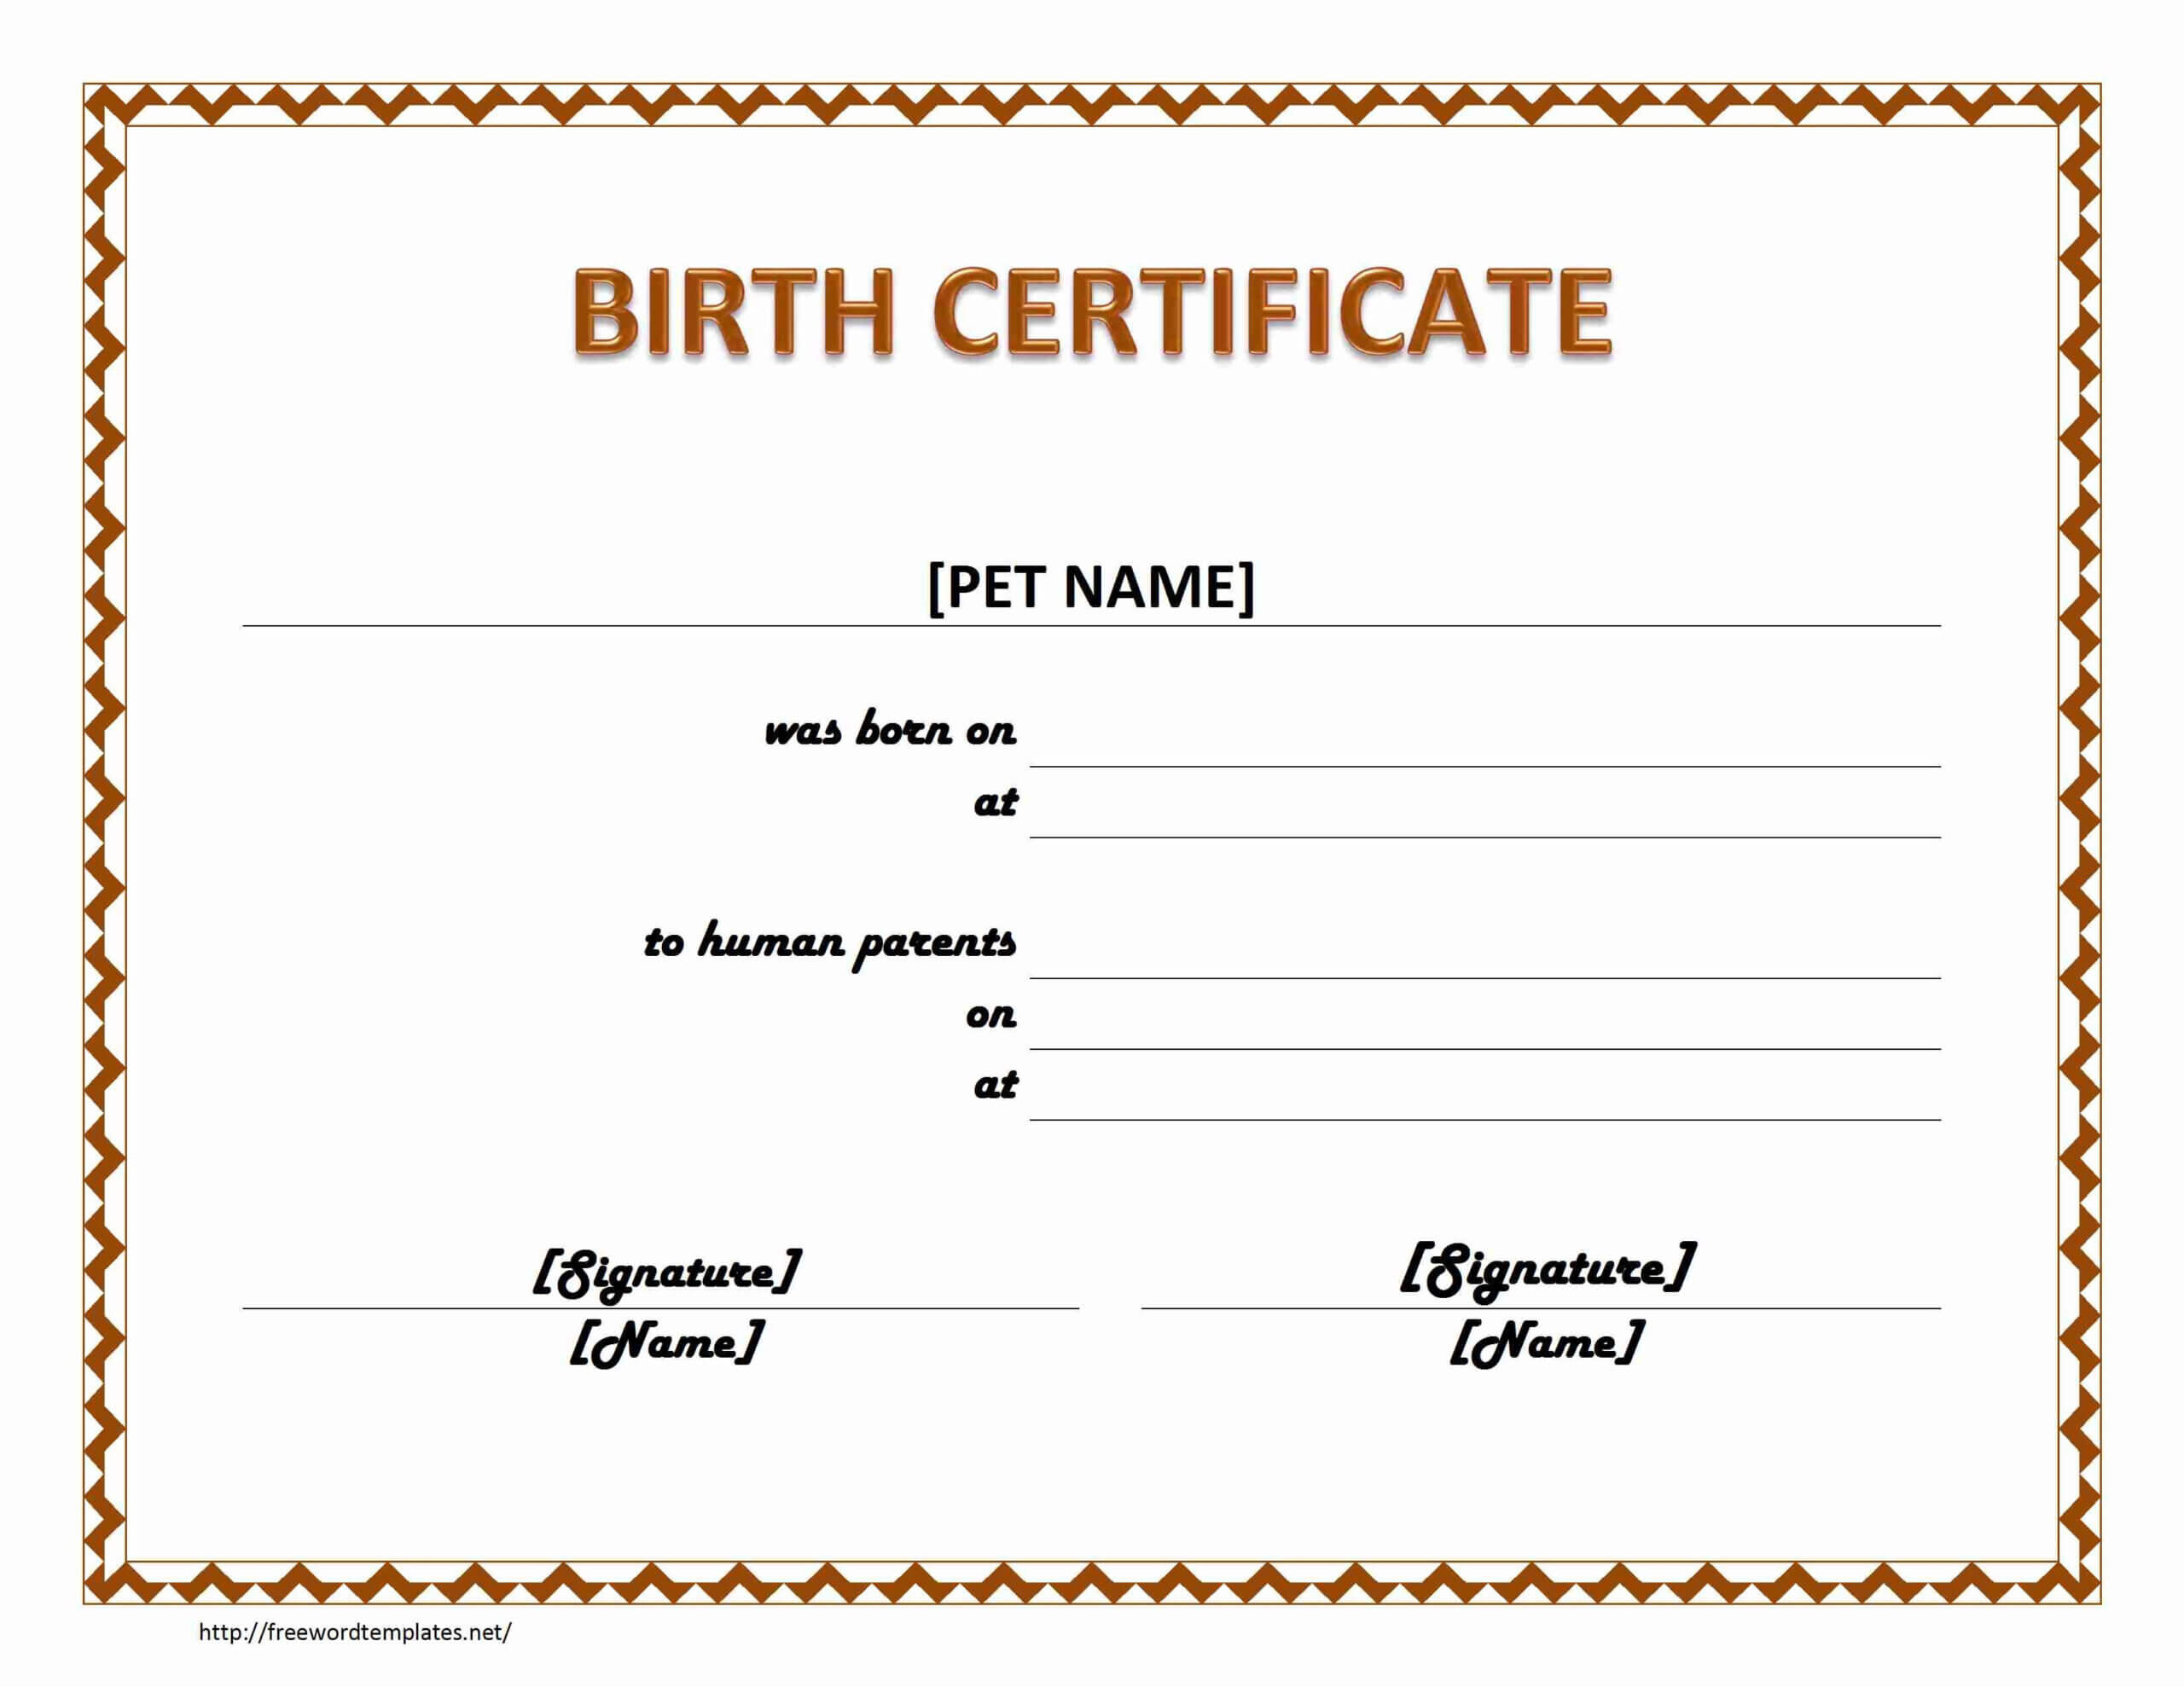 Pet Birth Certificate Maker | Pet Birth Certificate For Word Pertaining To Birth Certificate Templates For Word